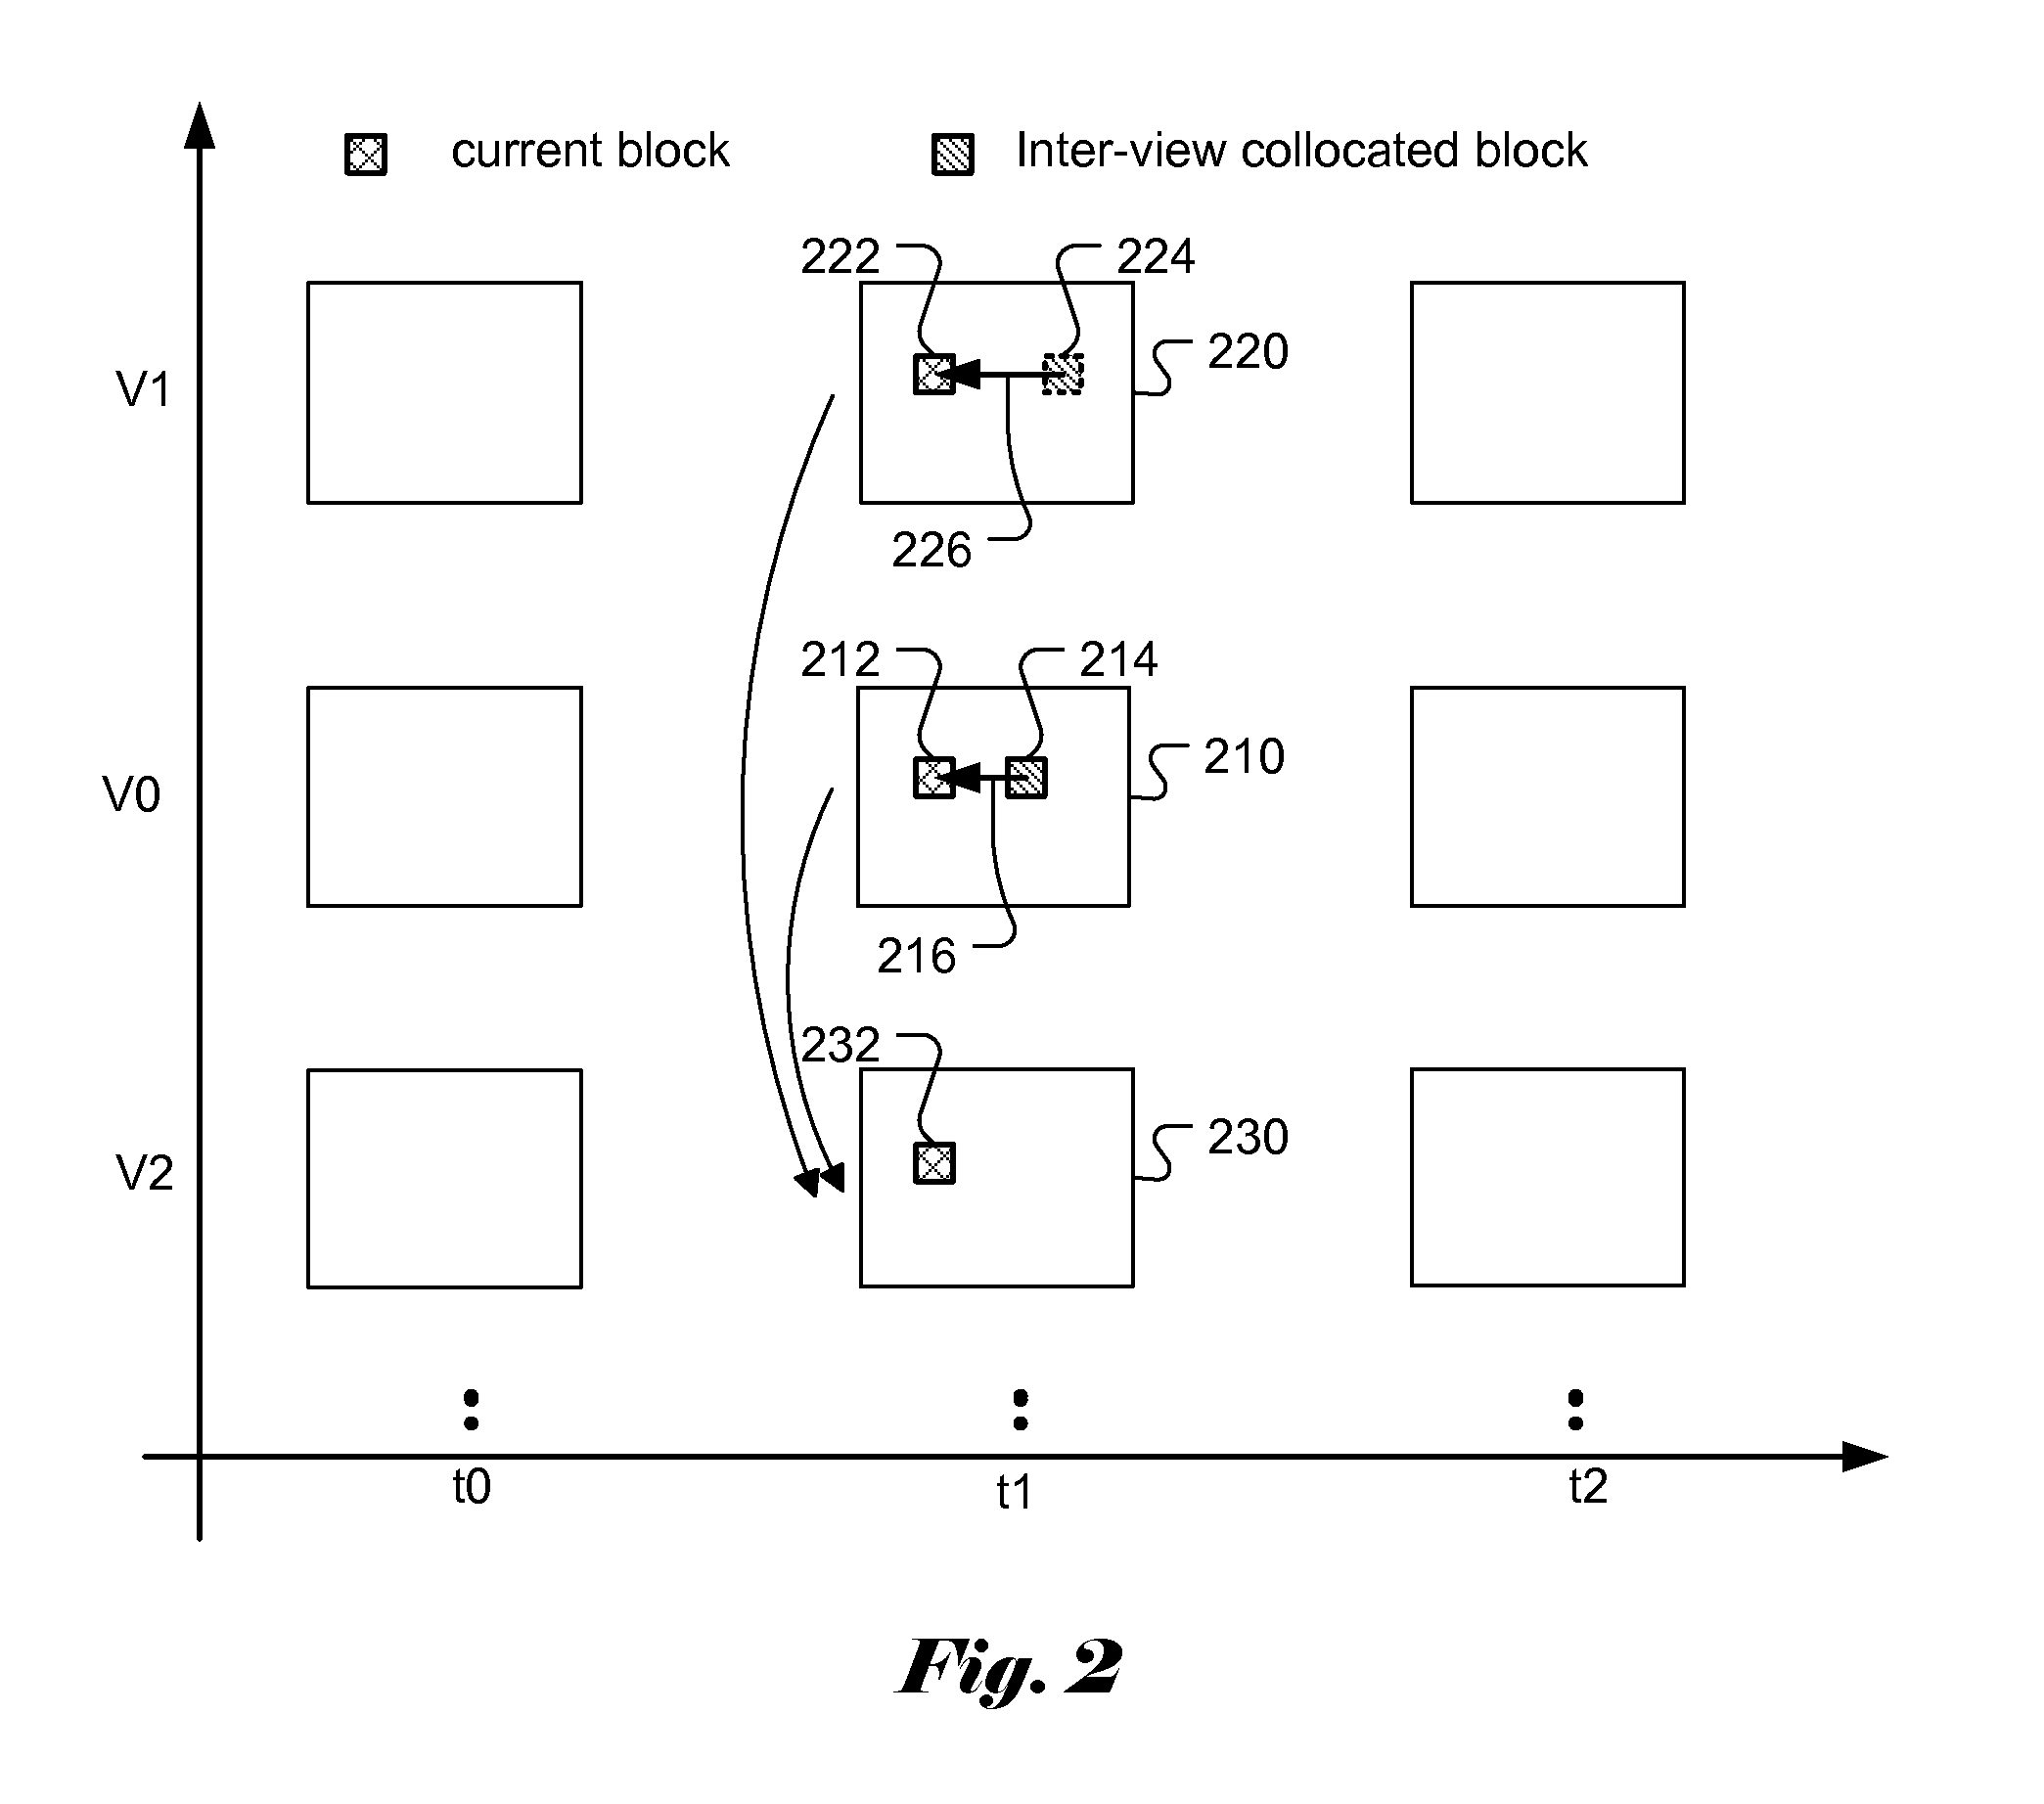 Method of fast encoder decision in 3D video coding